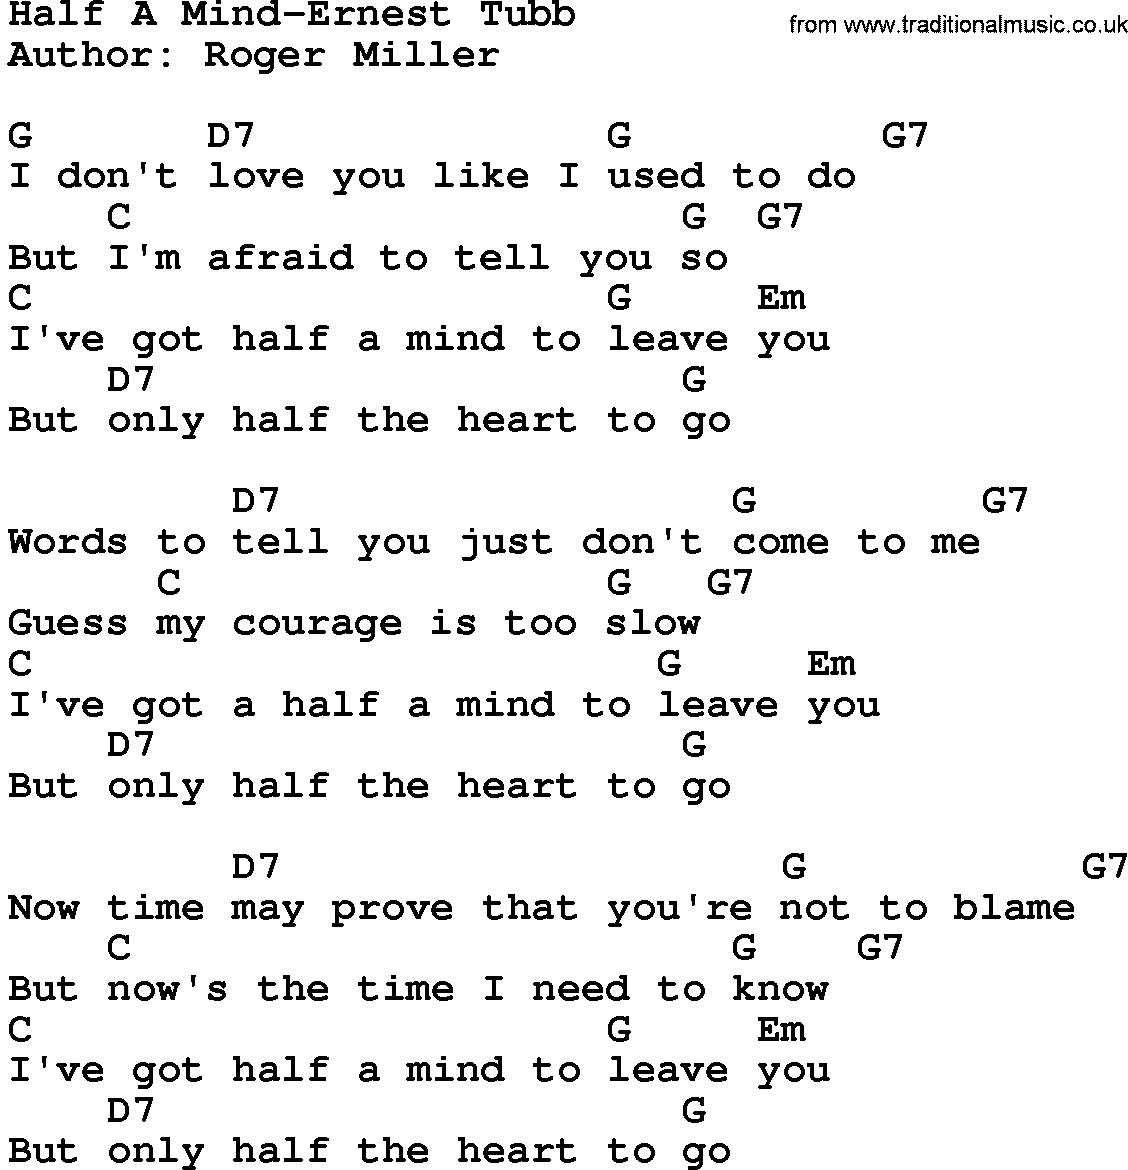 Country music song: Half A Mind-Ernest Tubb lyrics and chords